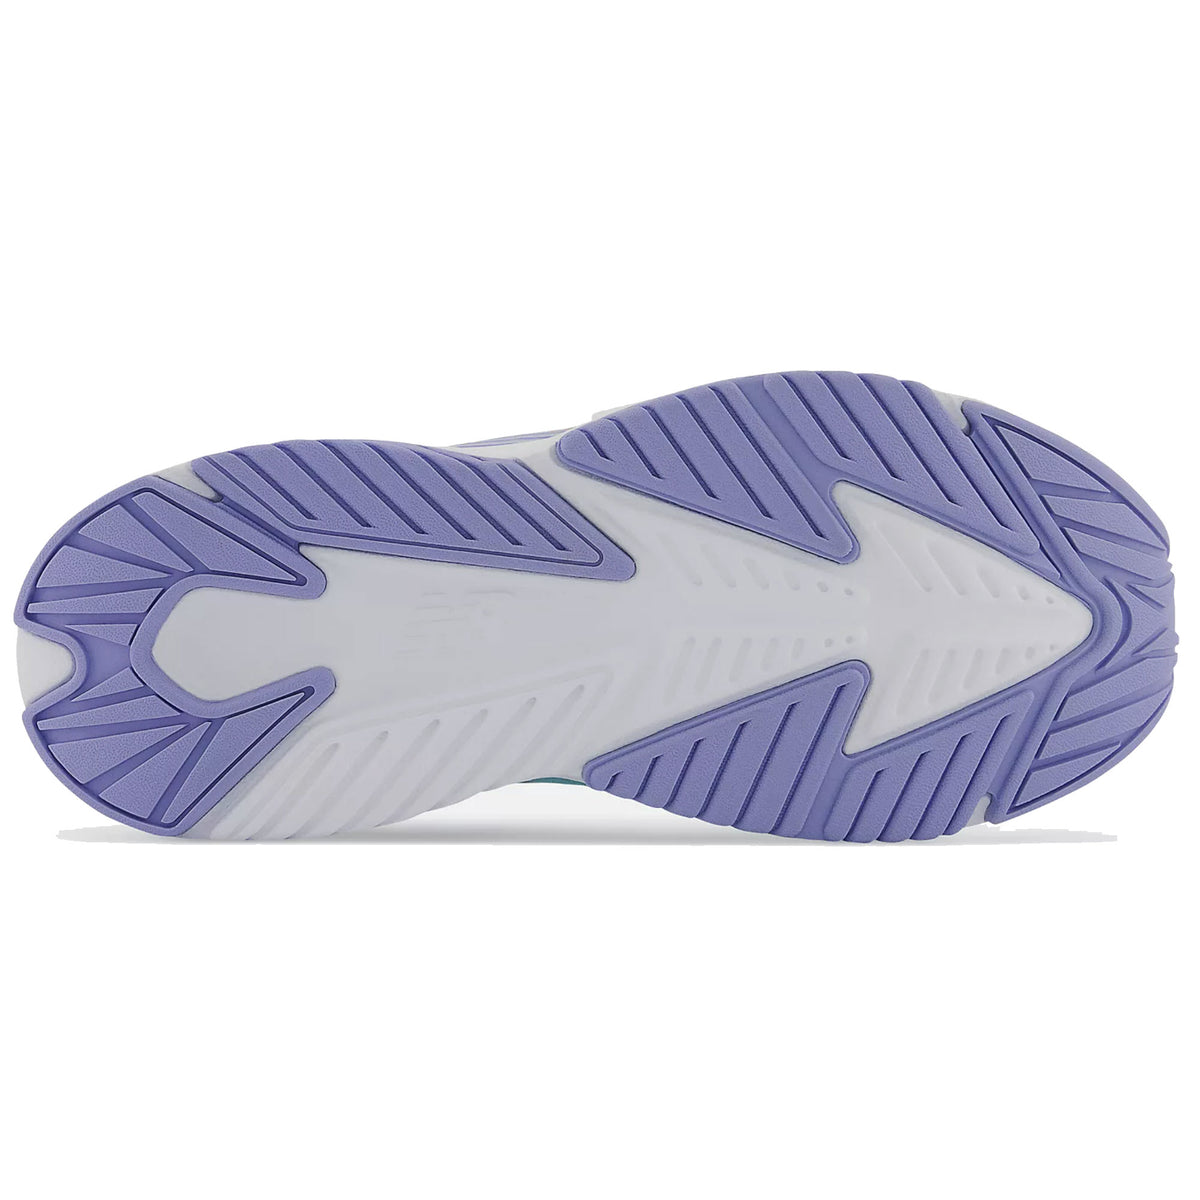 Bottom view of a New Balance RAV RUN V2 SURF/PEACH GLAZE - KIDS running shoe with a white and lavender rubber sole showing a detailed tread pattern.